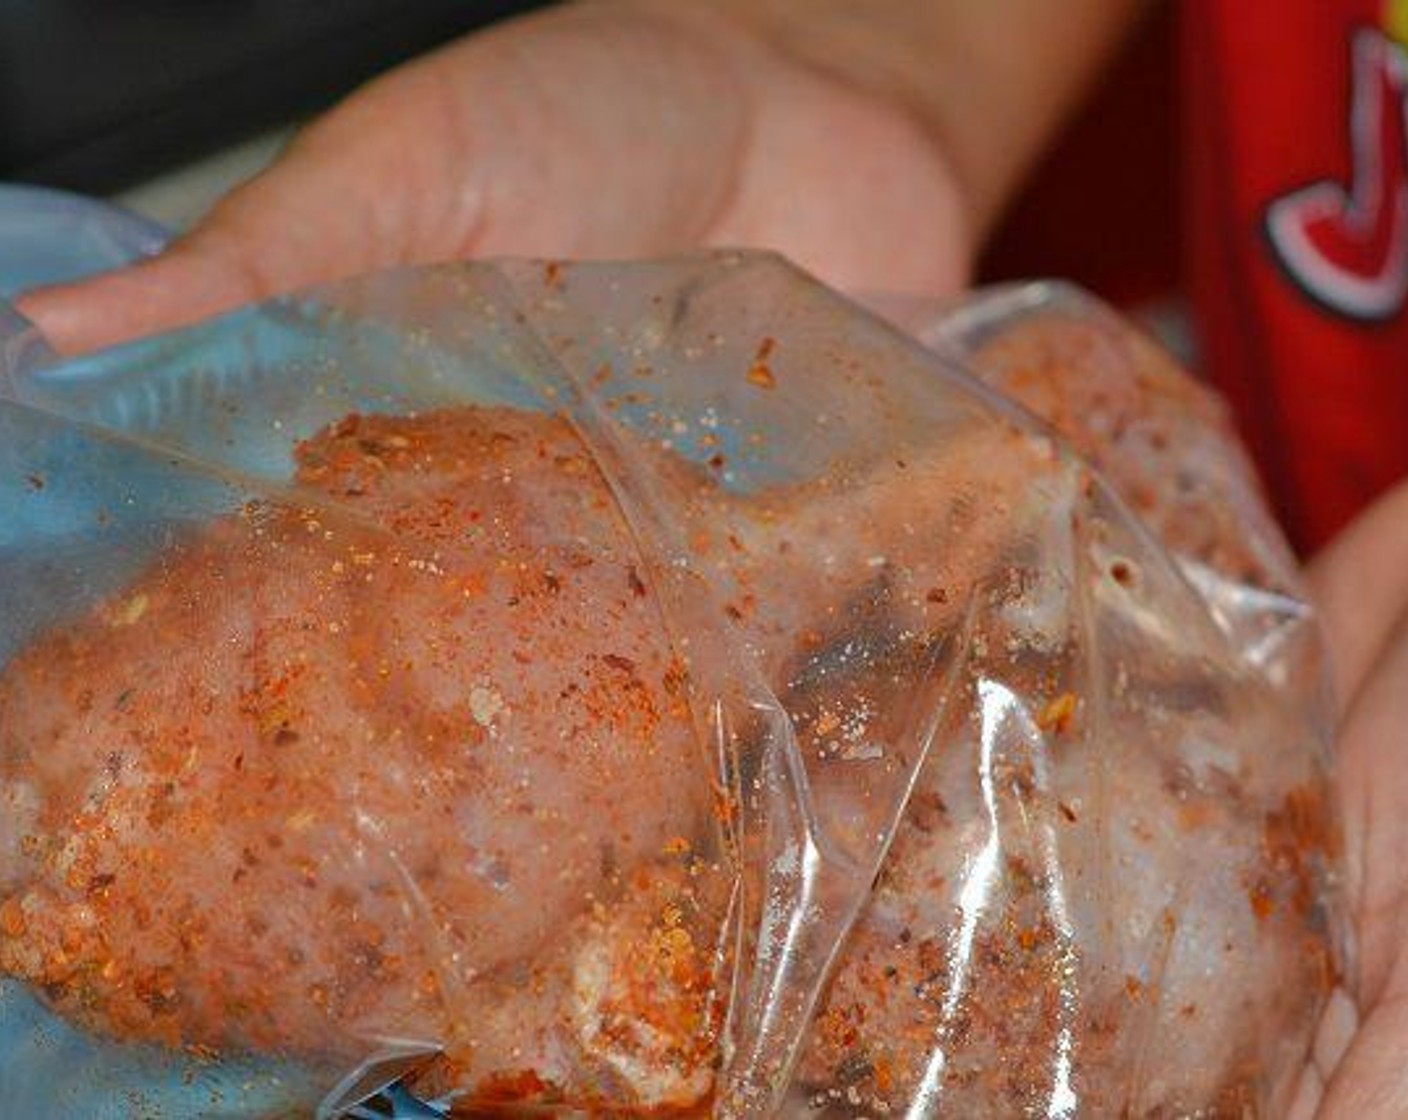 step 2 To a ziplock bag, place the chicken legs inside together with the Italian Seasoning (2 Tbsp), Vegetable Oil (1 Tbsp), and Salt (to taste). Massage the herbs and spices into the legs.